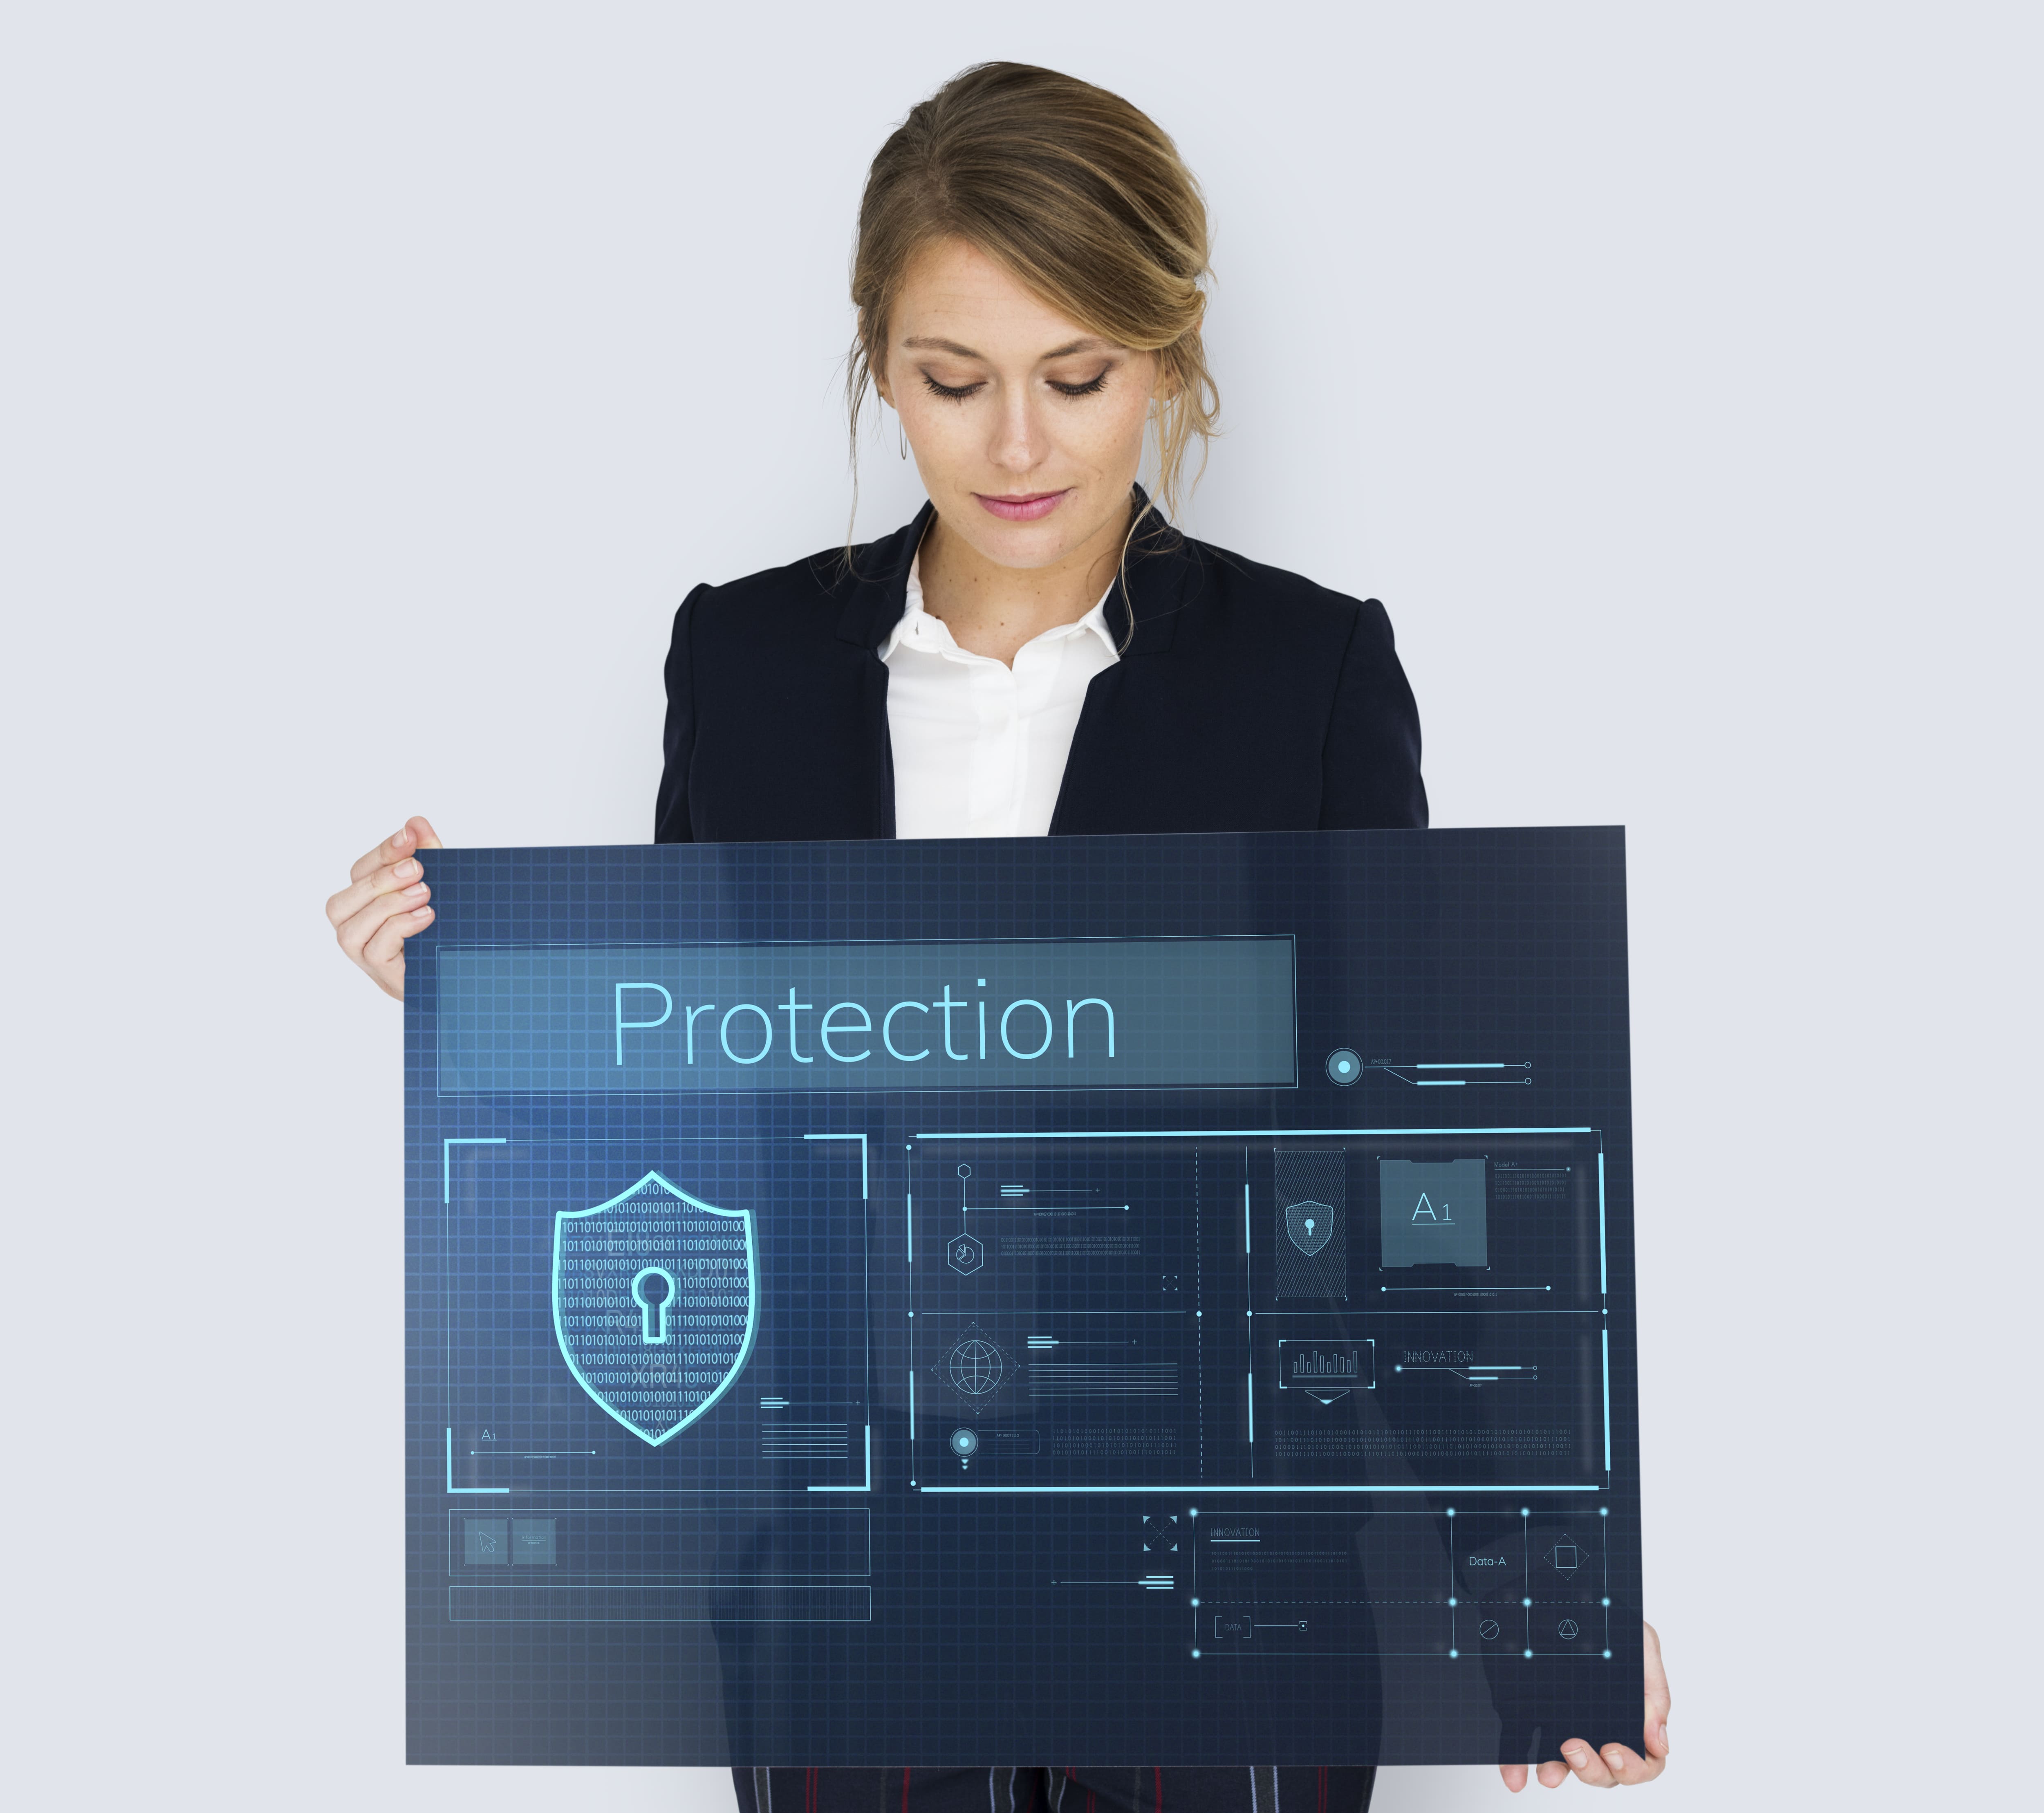 Protect Your System by Complying with Regulations through Our Identity Risk and Legal Compliance (IRC) Service